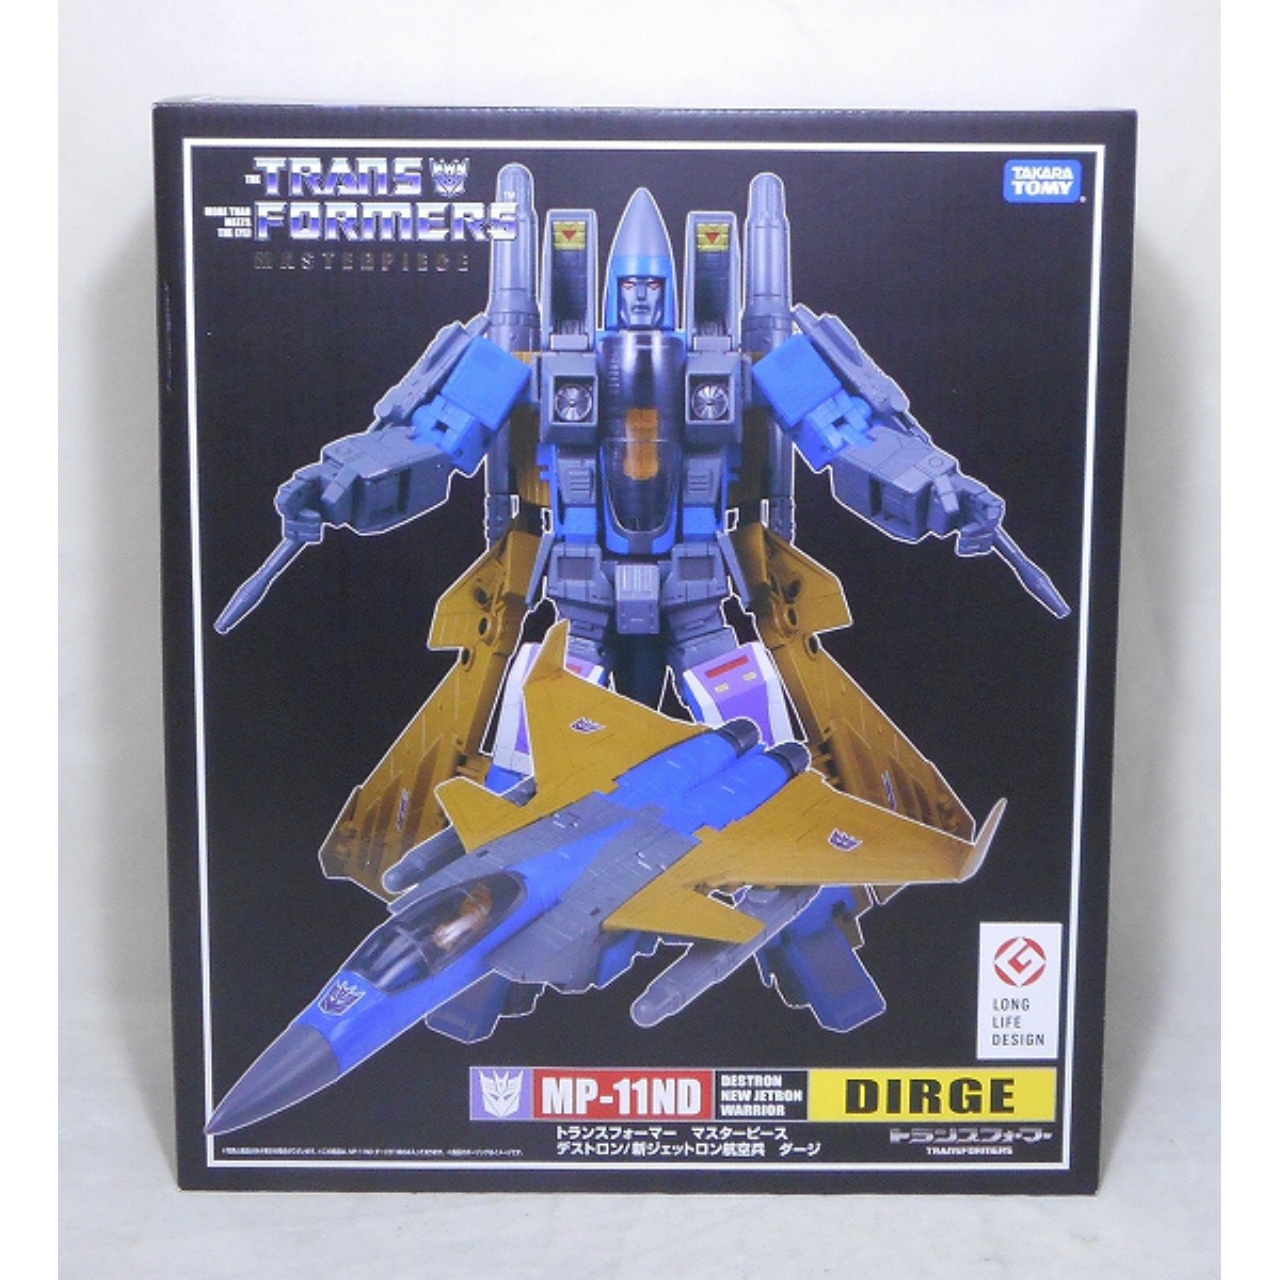 Transformers Masterpiece MP11ND Dirge